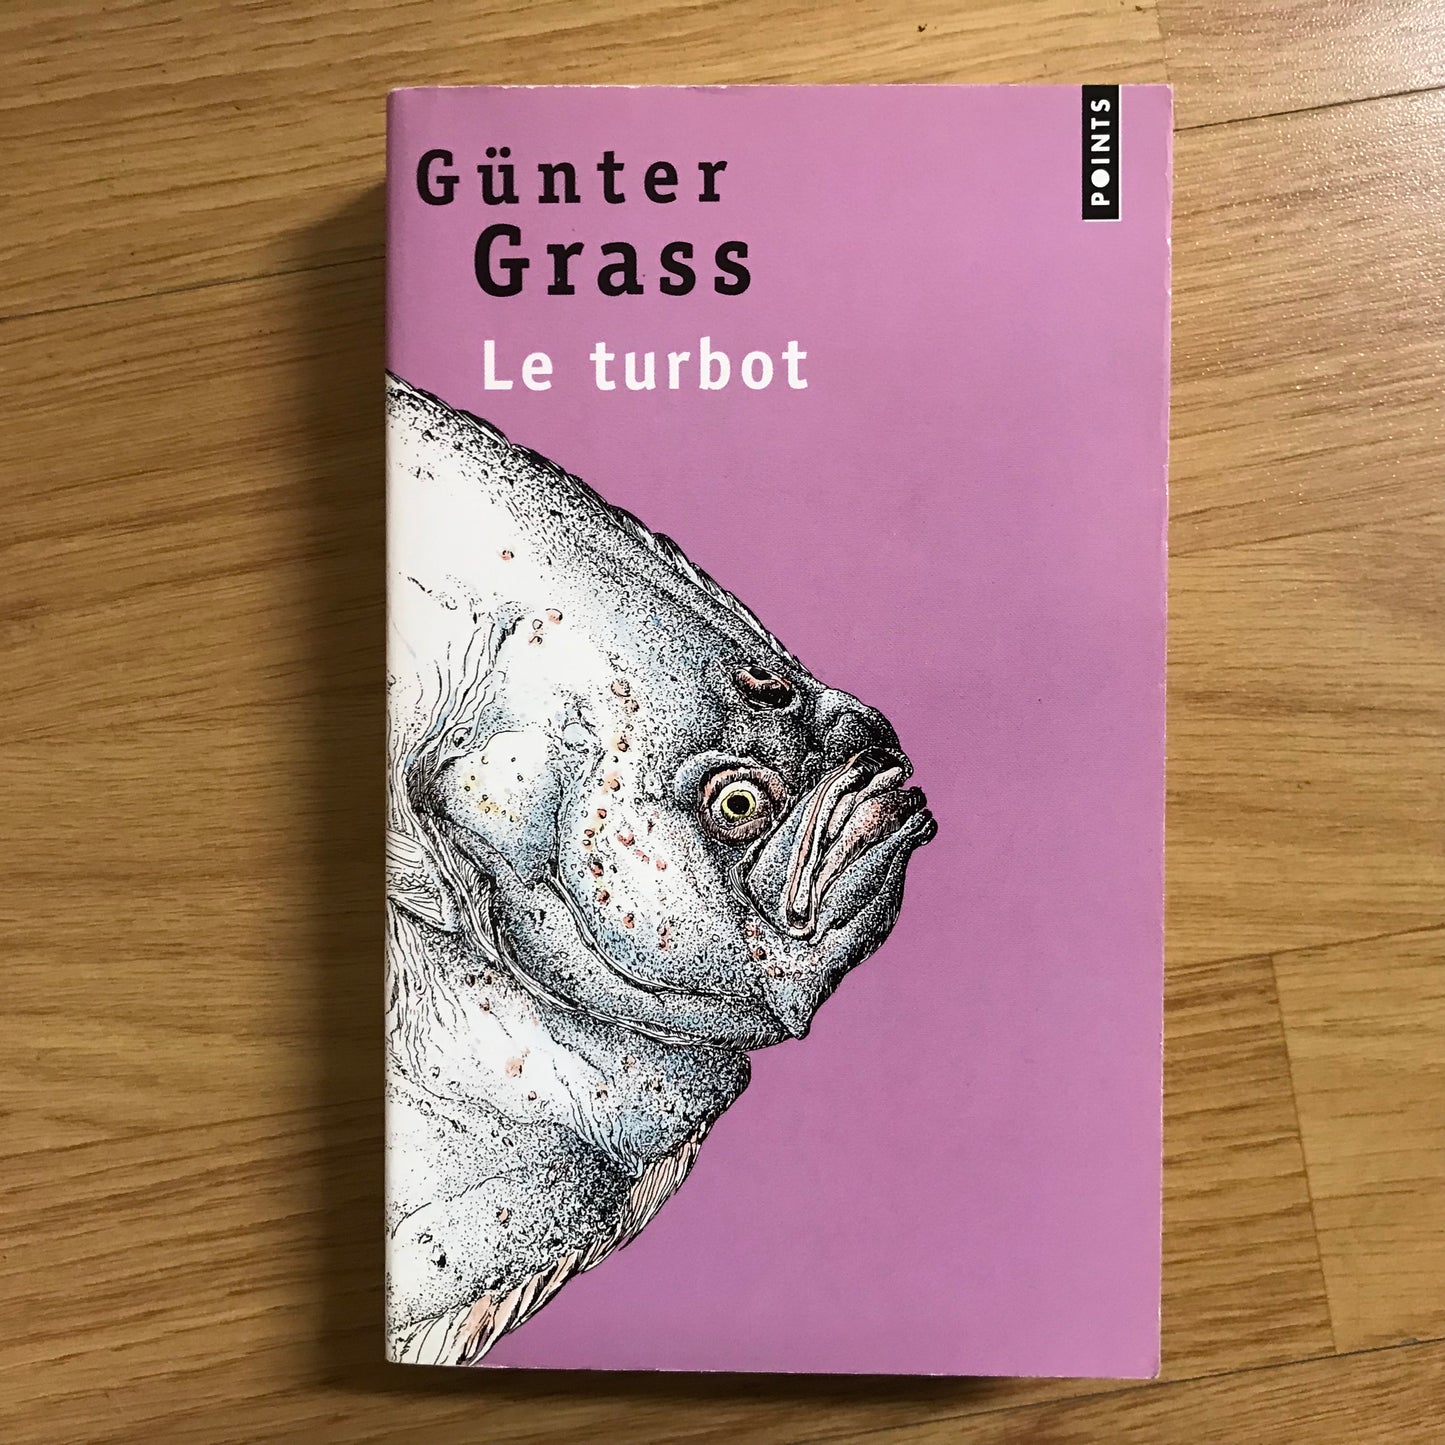 Grass, Gunther - Le turbot